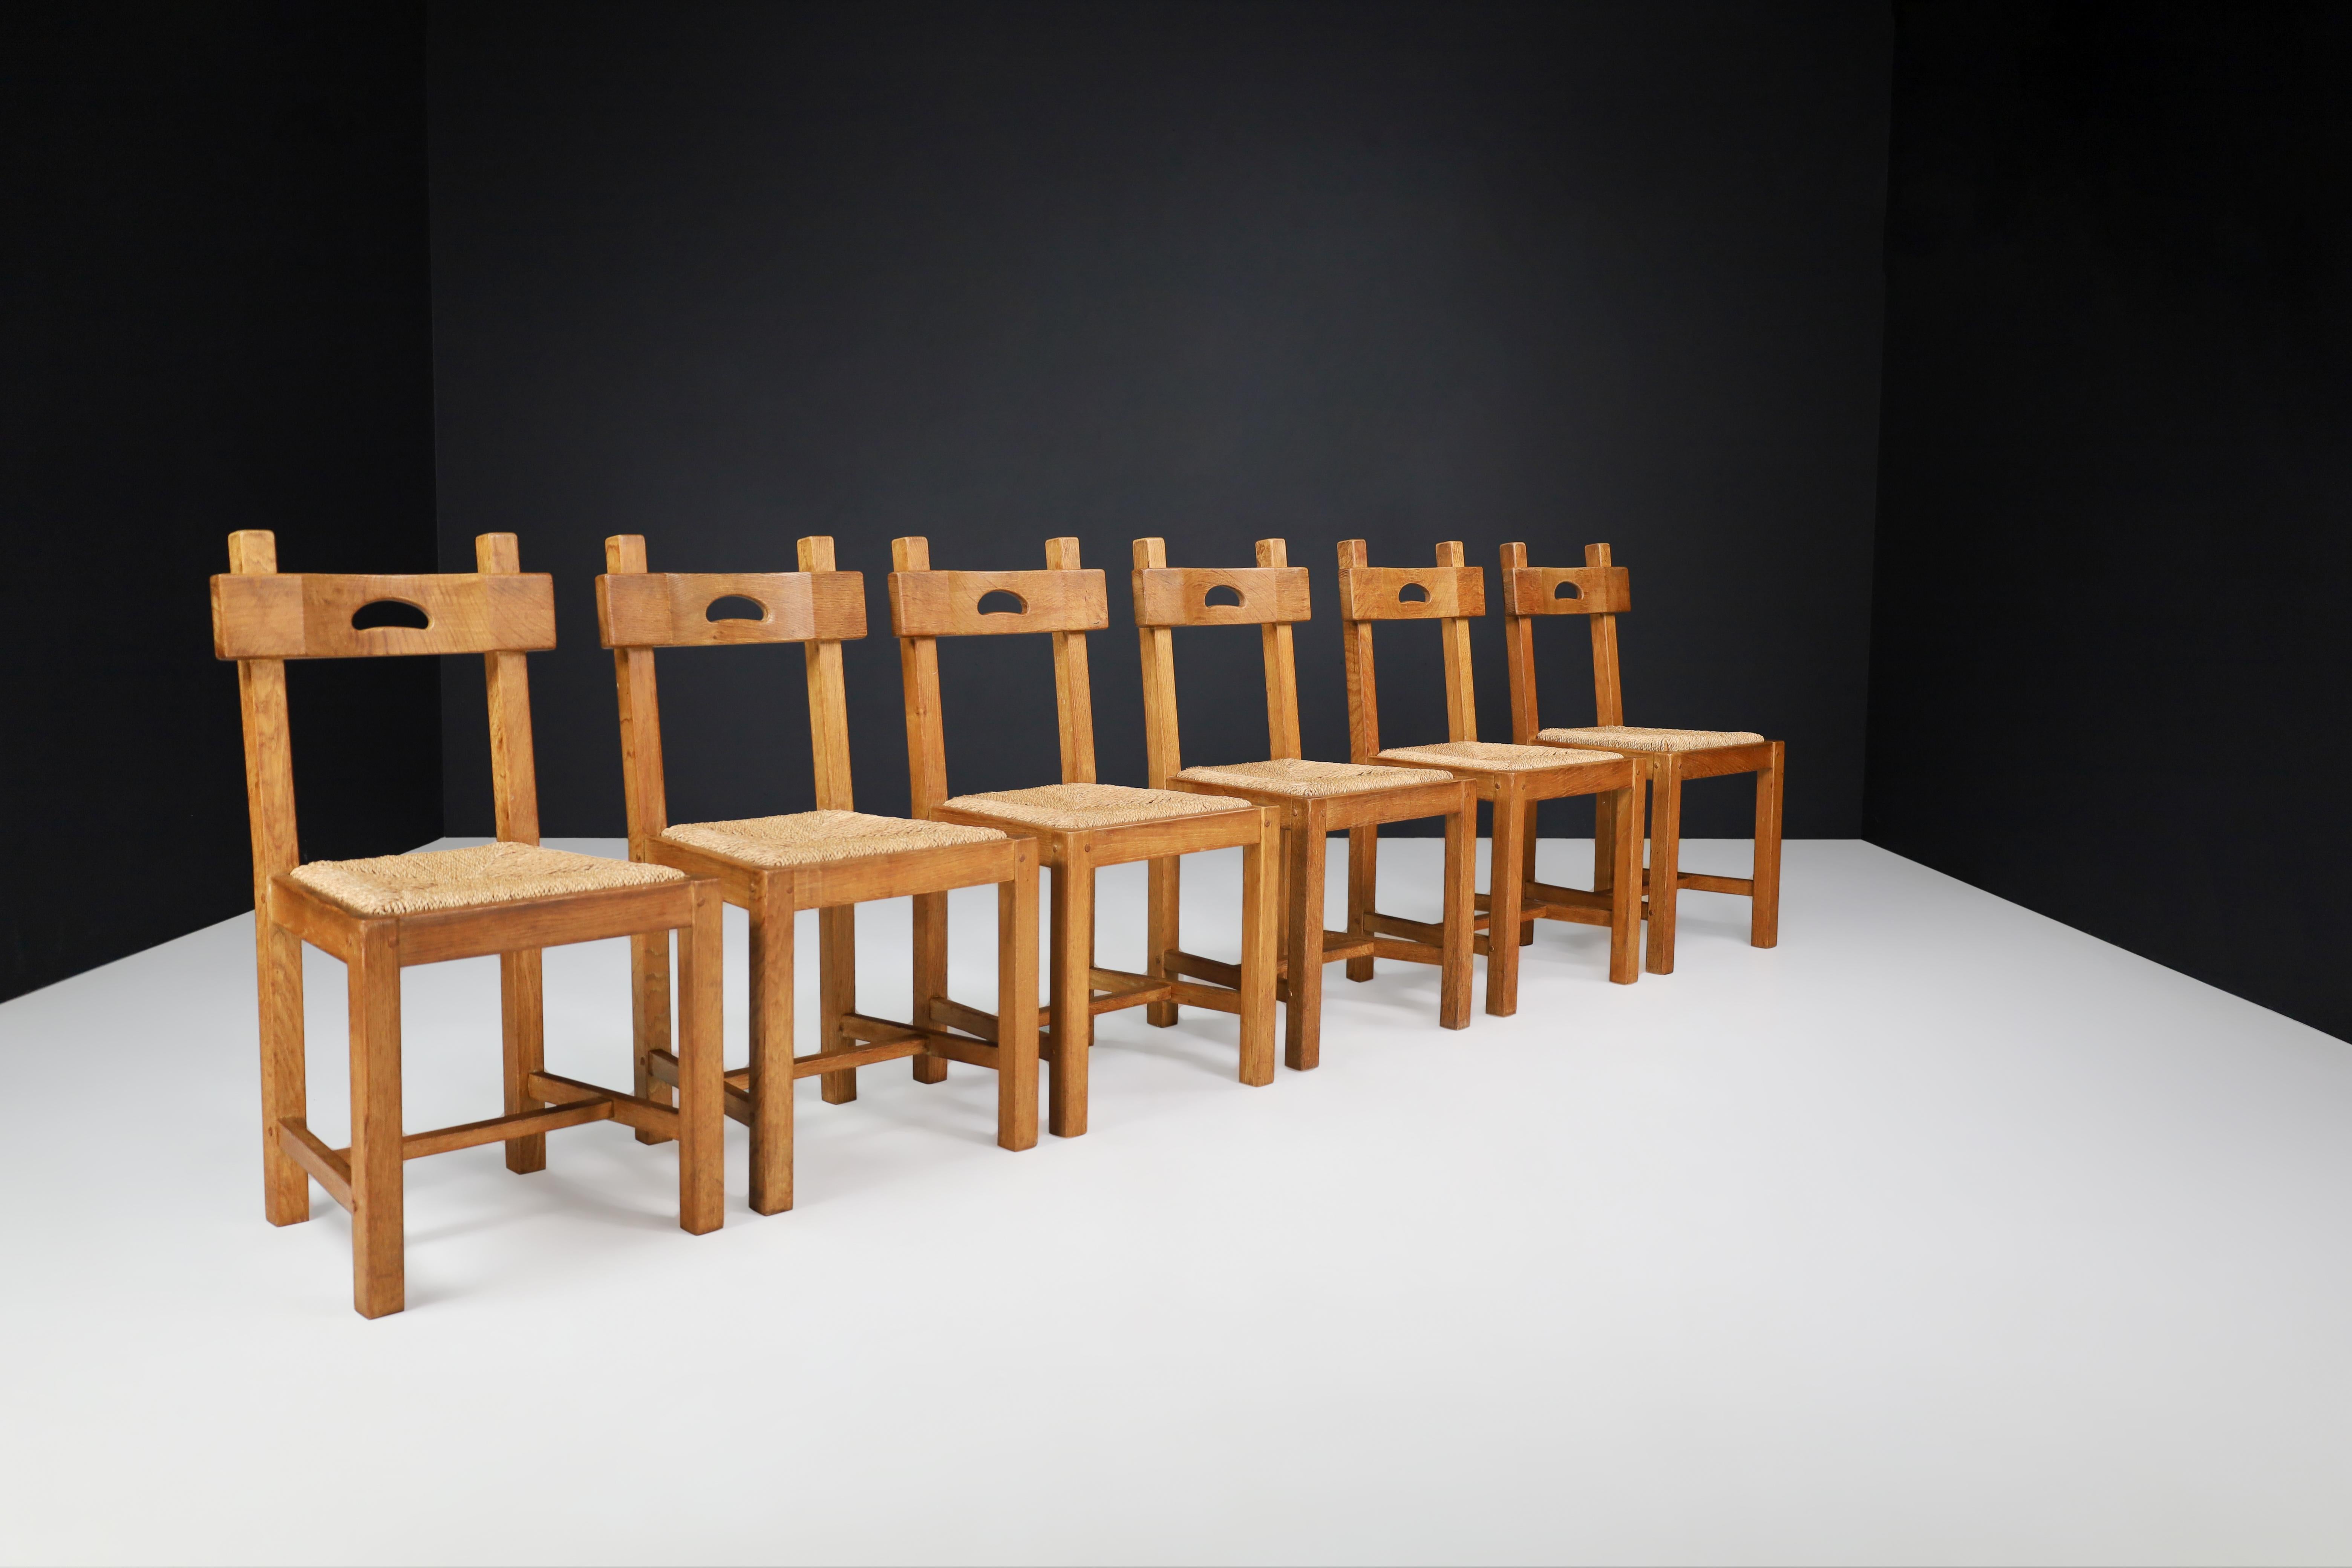 Brutalist Butralist Dining Chairs in Oak and Rush, France, 1960s For Sale